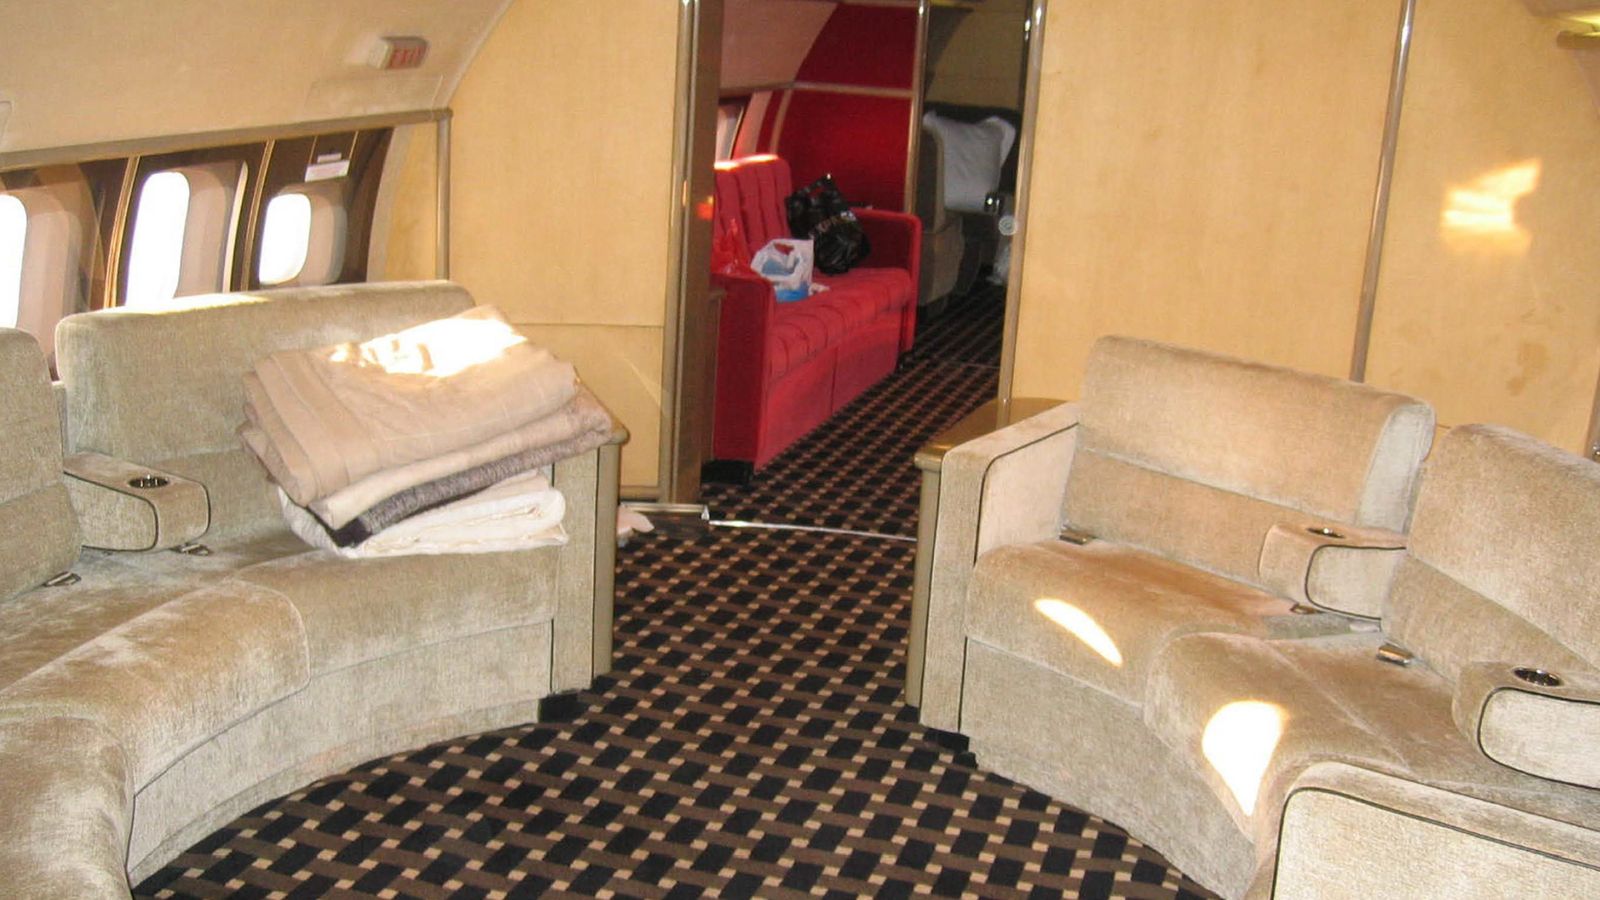 The interior of one of Epstein’s planes